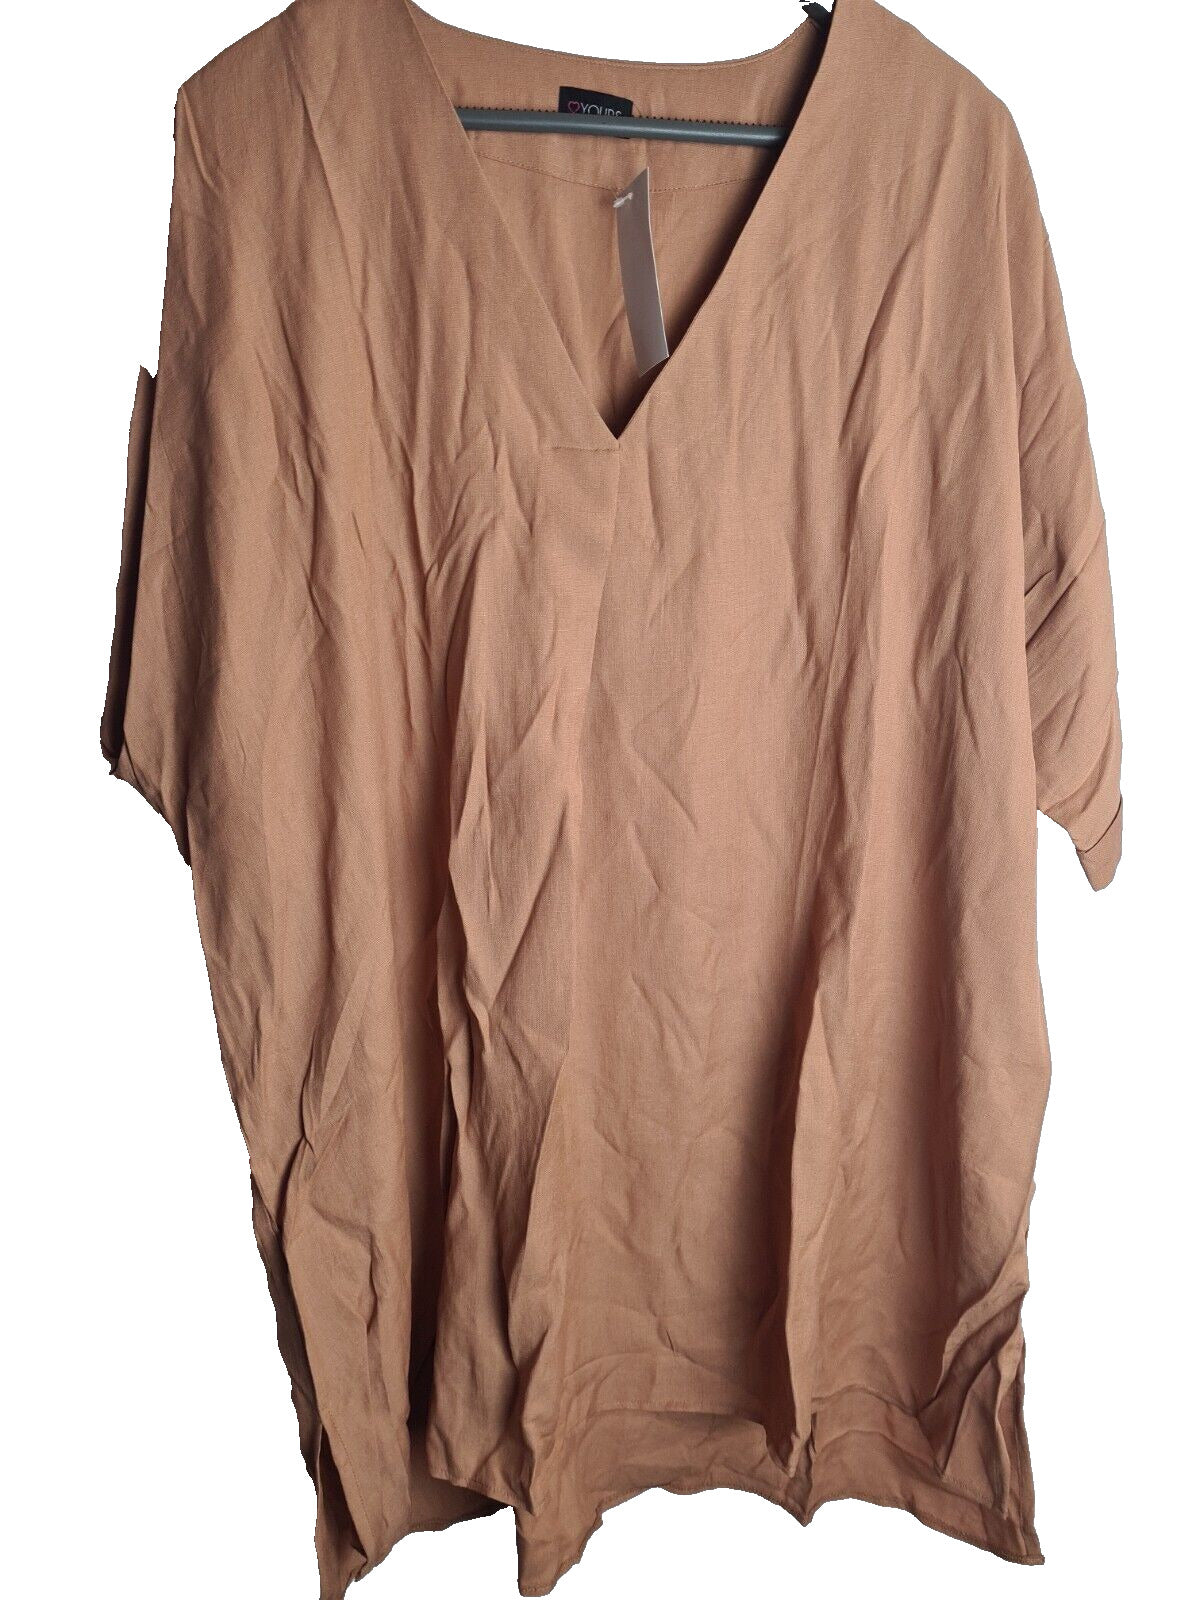 Yours Brown Grown On Sleeve Chiffron Shirt Size 22-24